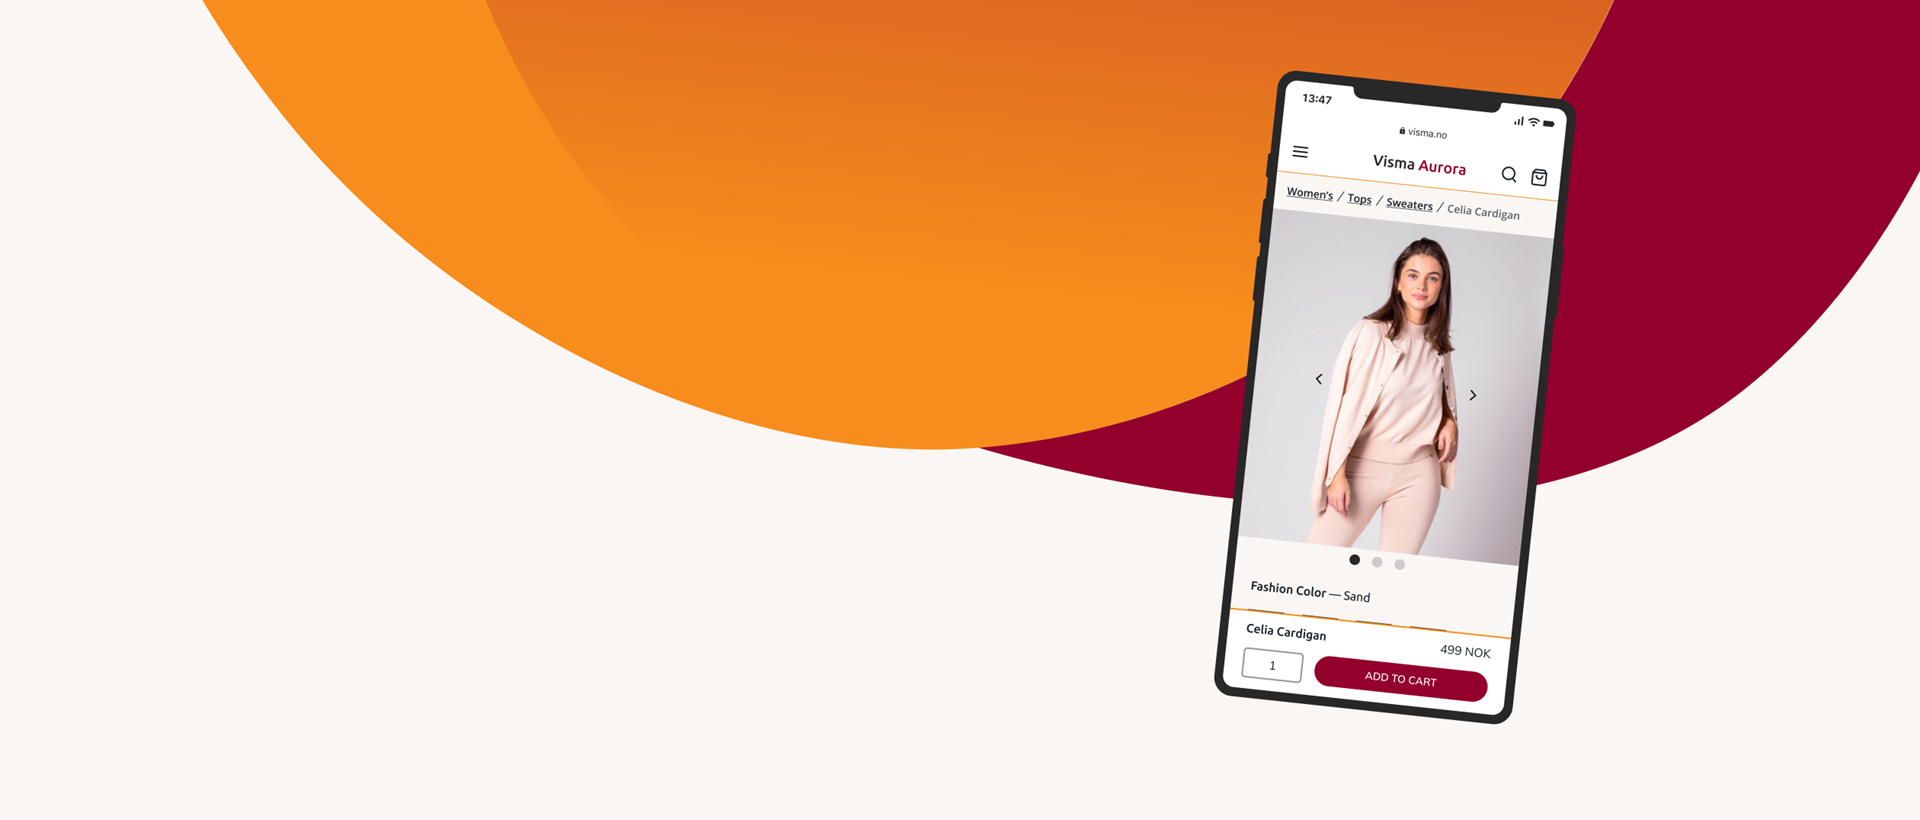 Warm-colored graphic elements, with a floating iPhone showing a product page from a store